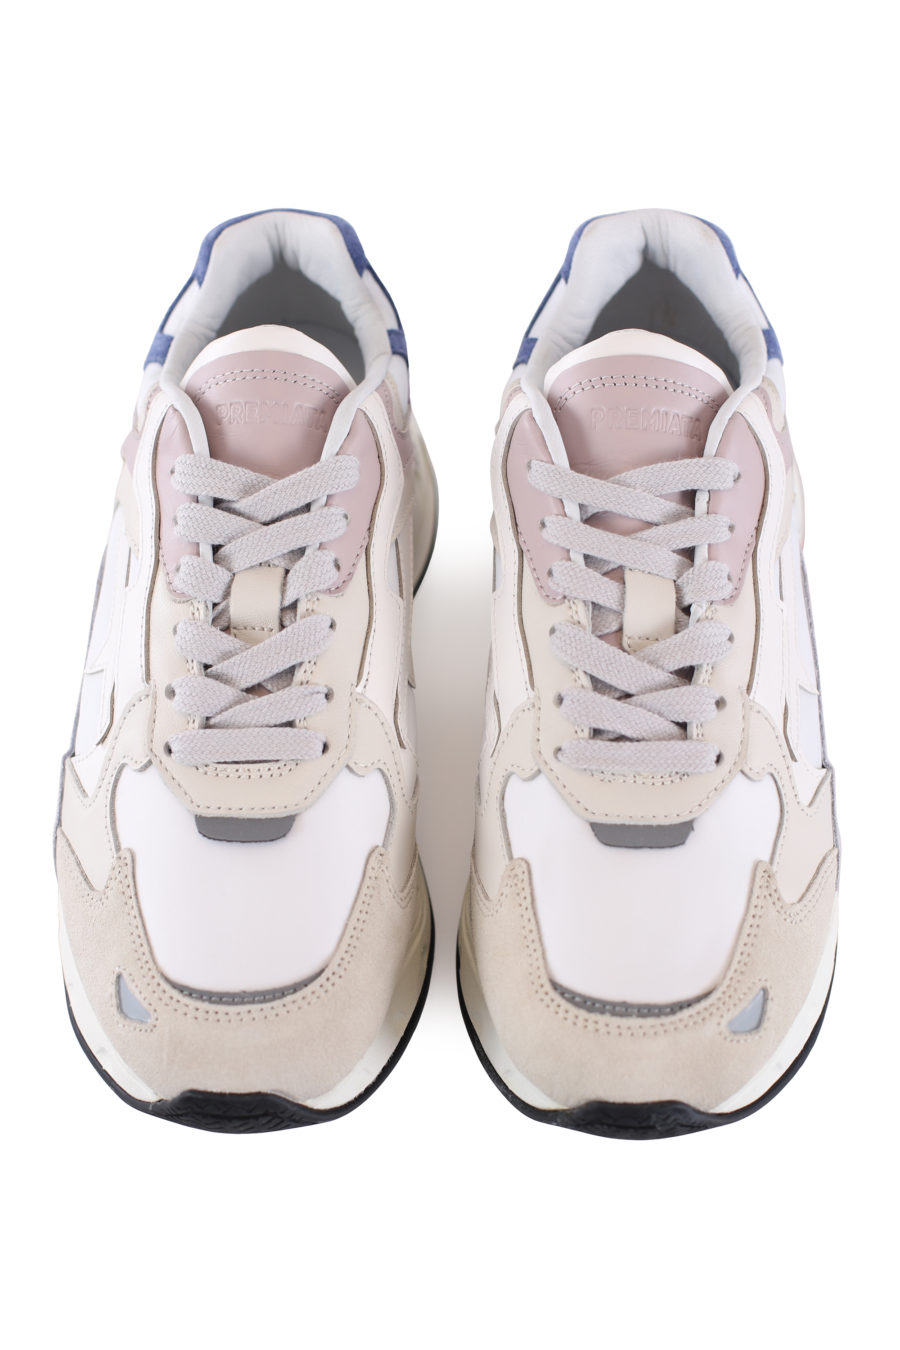 Beige trainers with pastel coloured details "Sharkyd" - IMG 6970